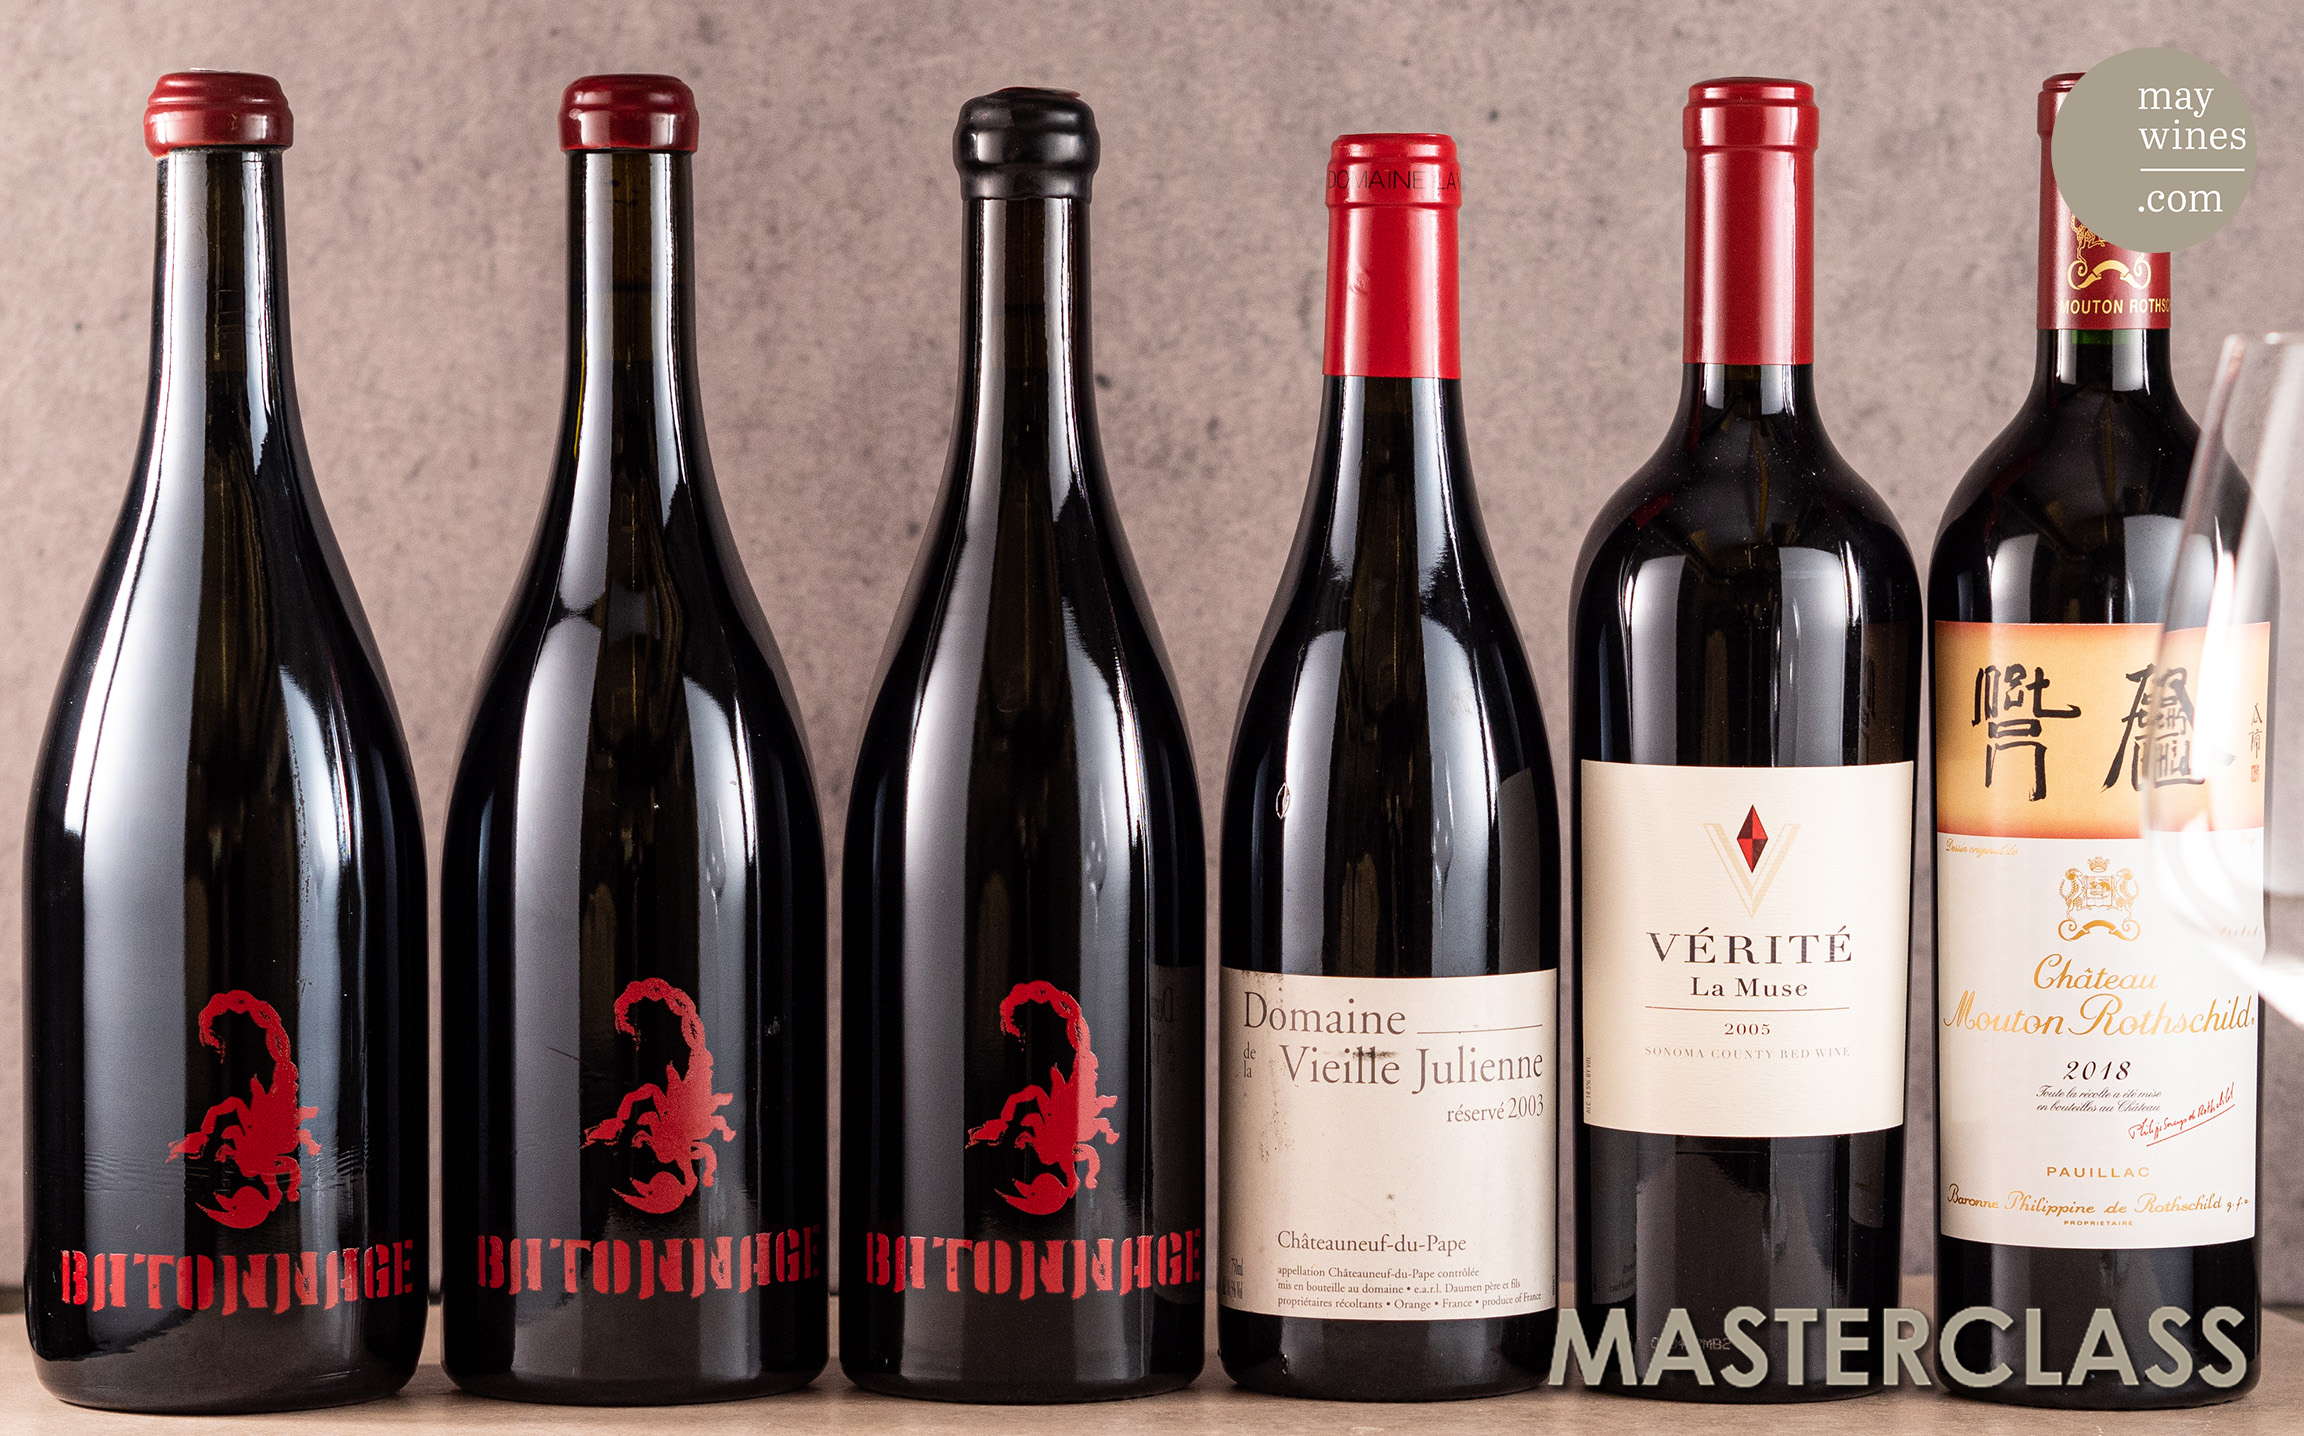 News - May Wines - exclusive wines